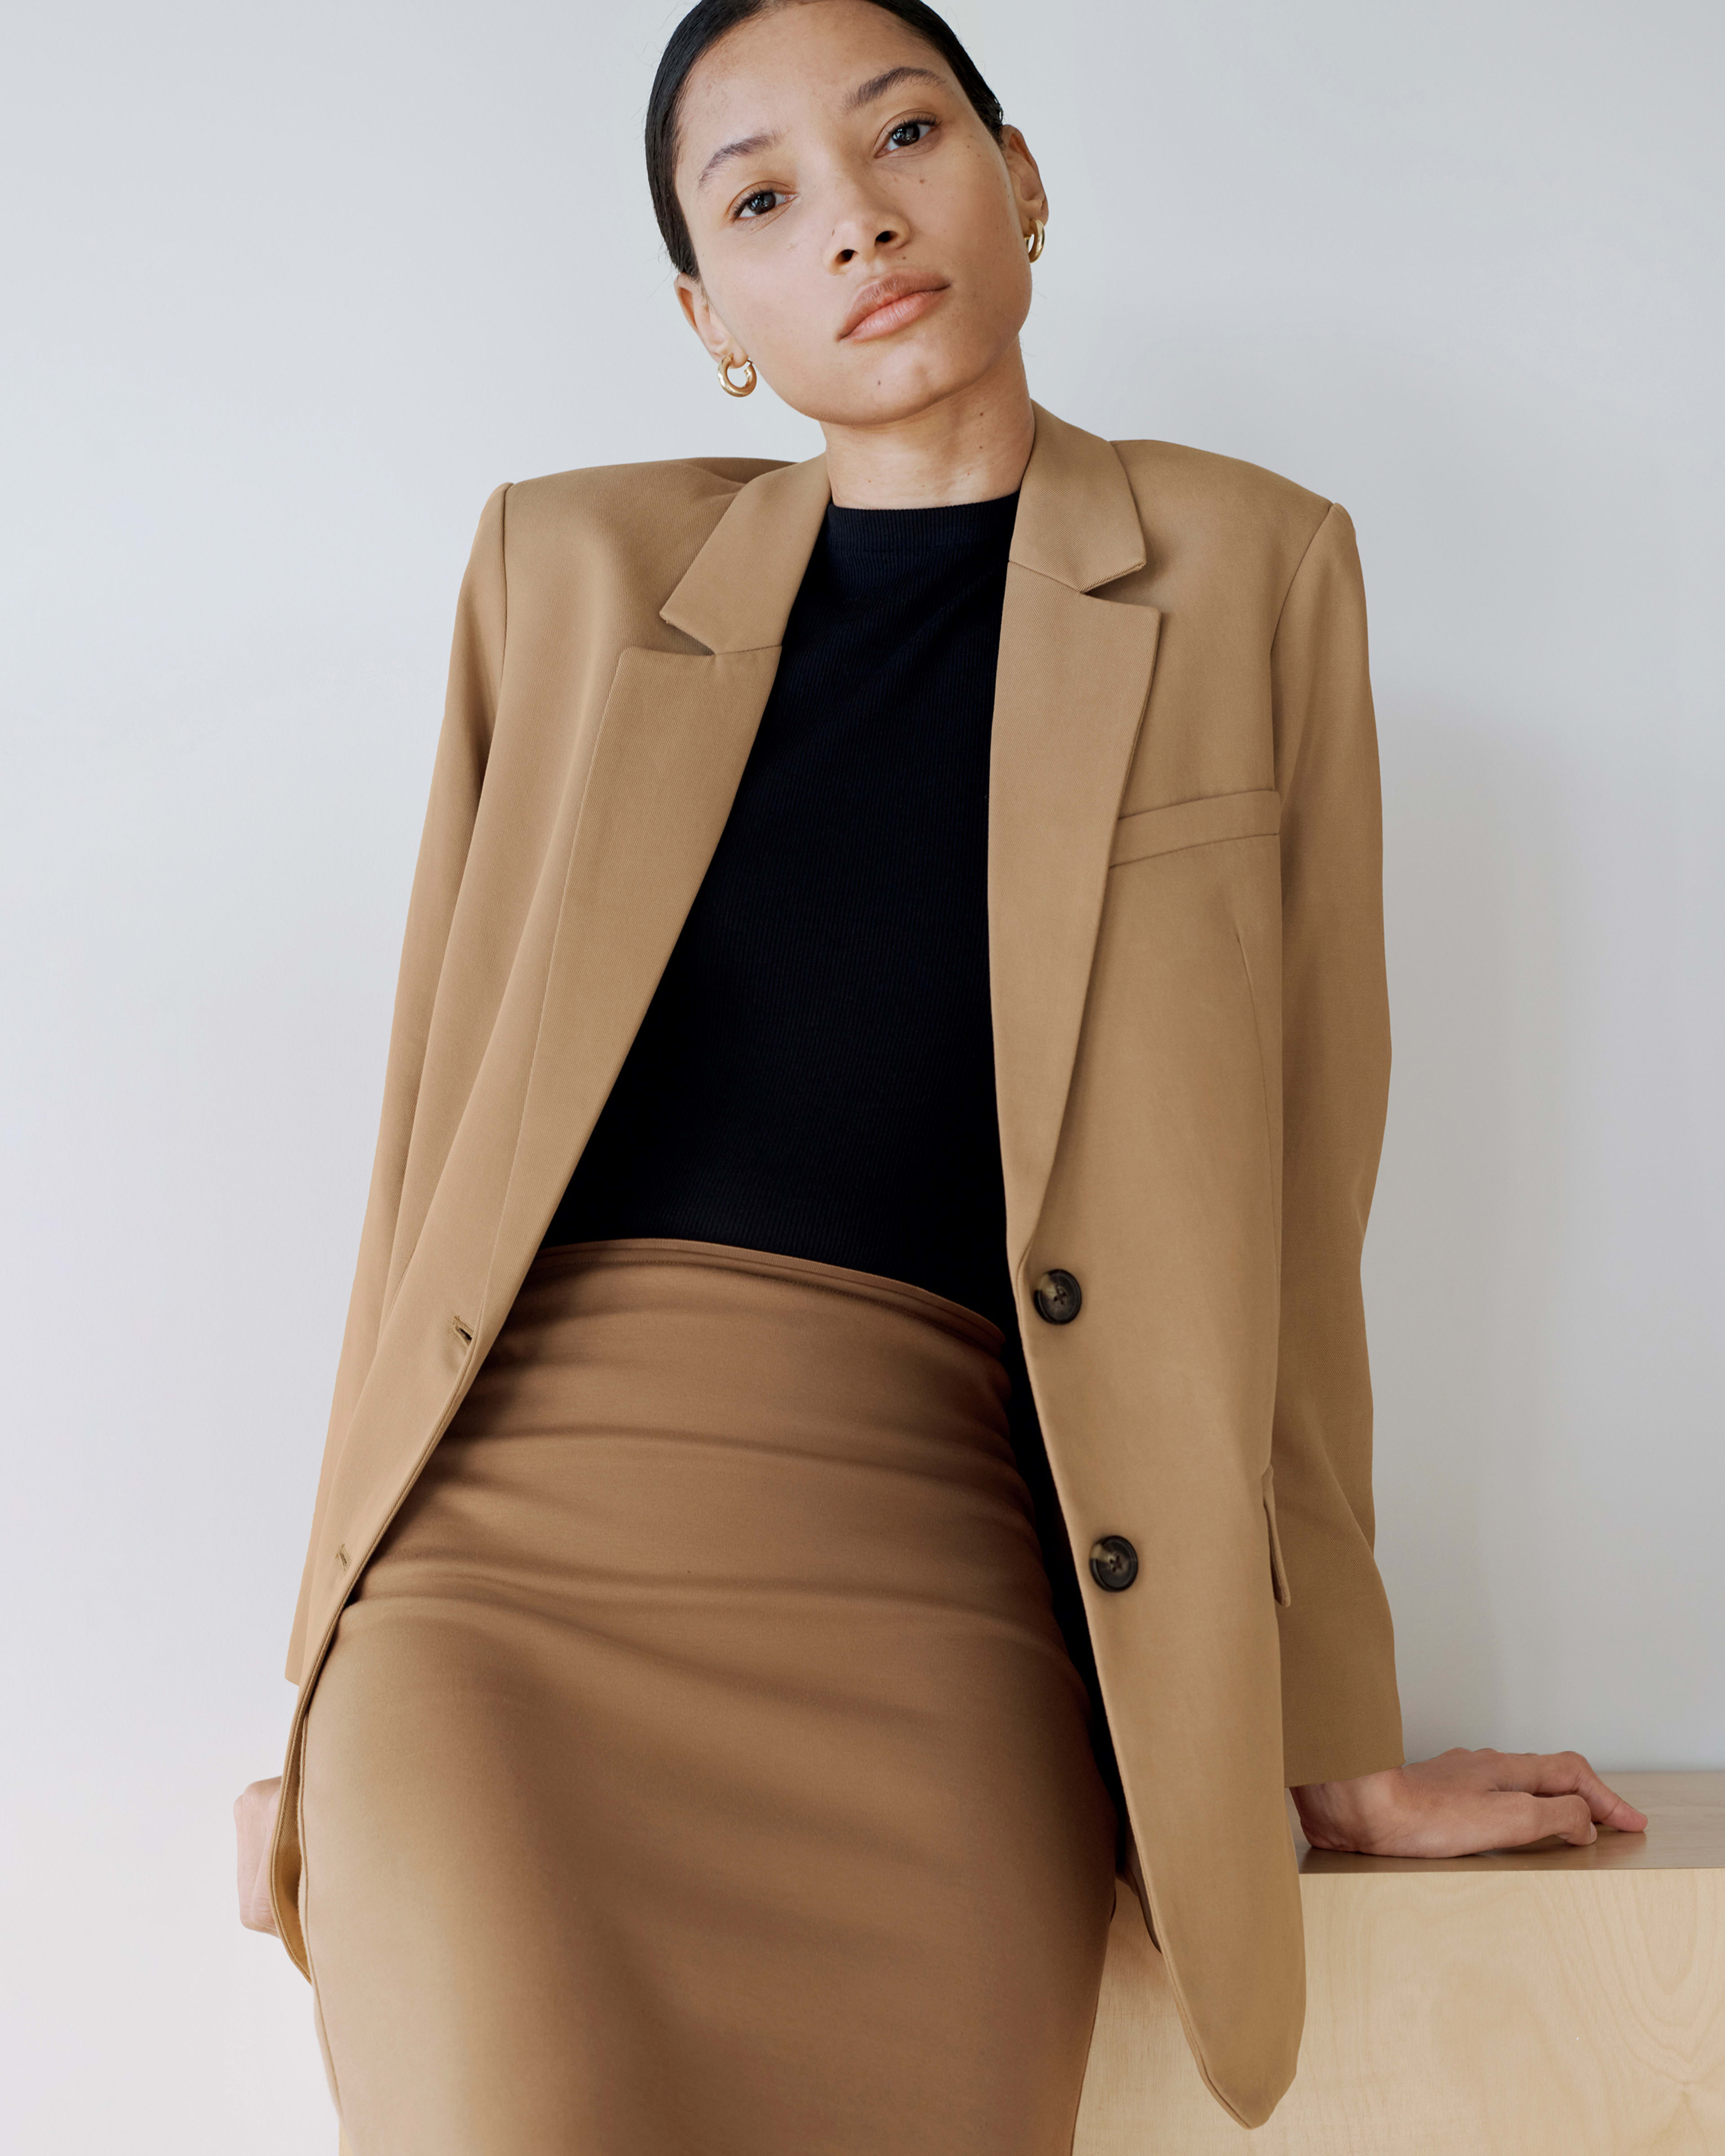 Everlane's Oversized Double Breasted Blazer Review + New Arrivals